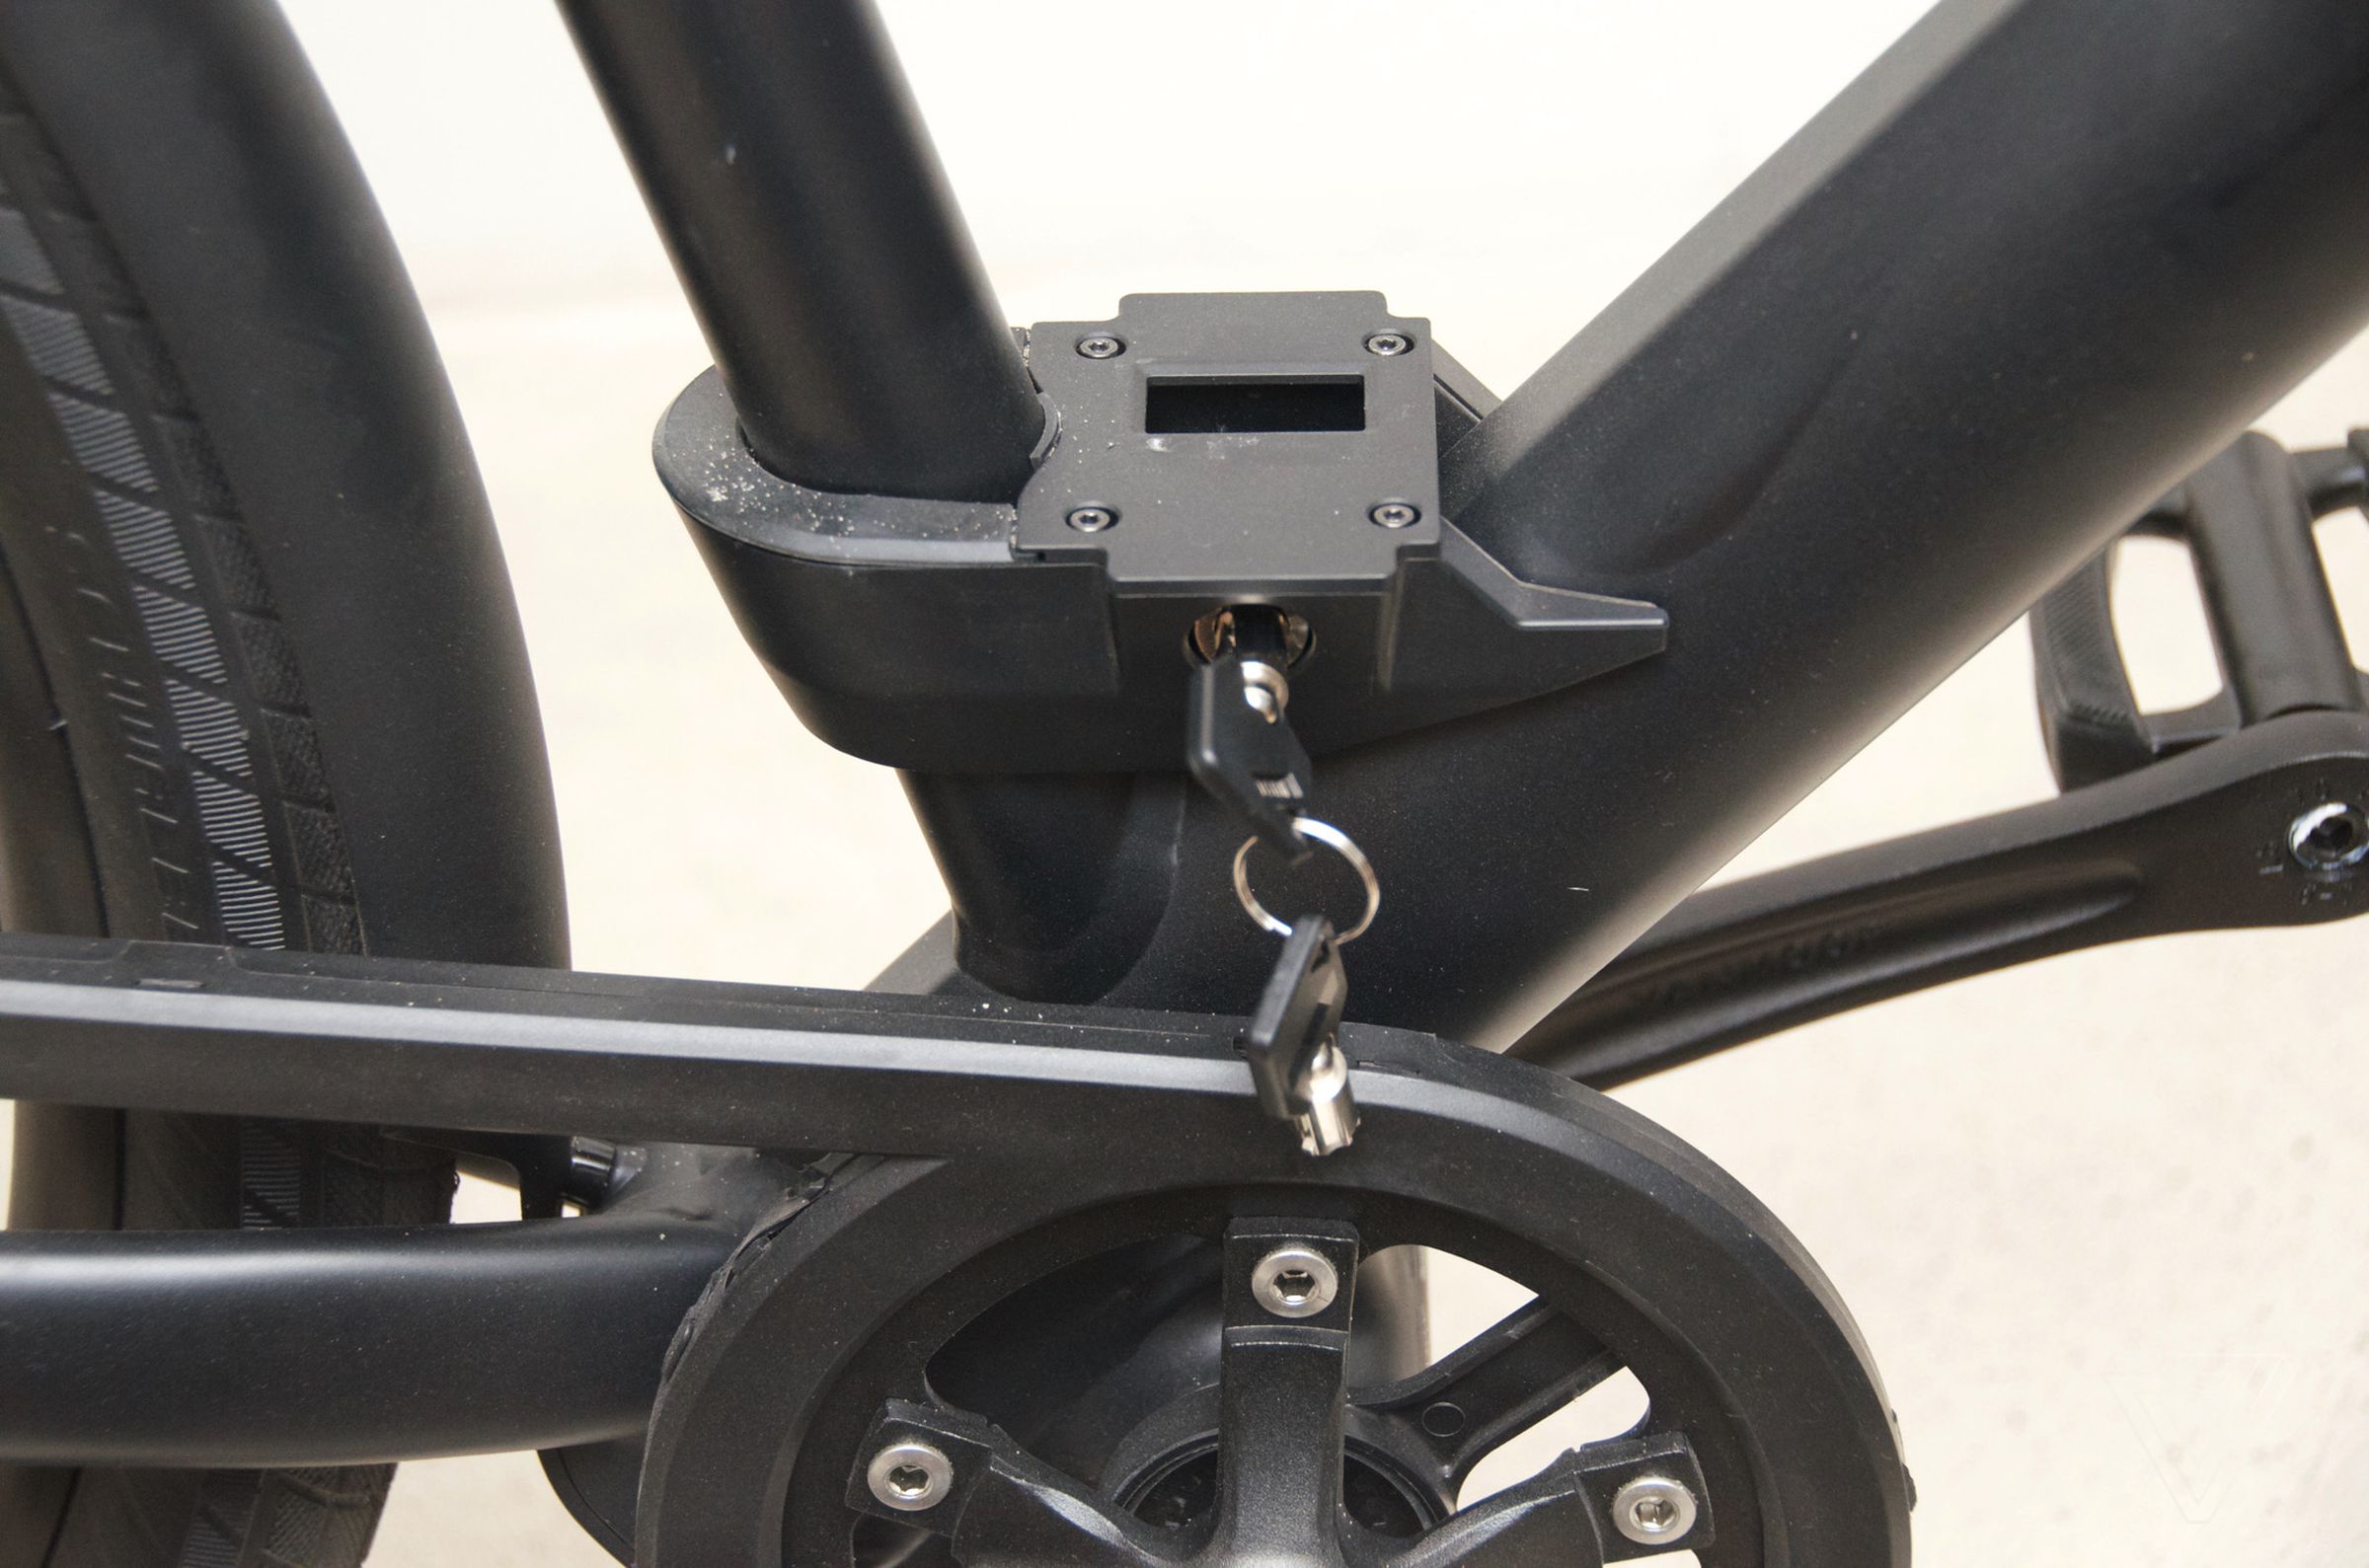 The PowerBank can be locked into place on a mount that must first be installed on the bike.